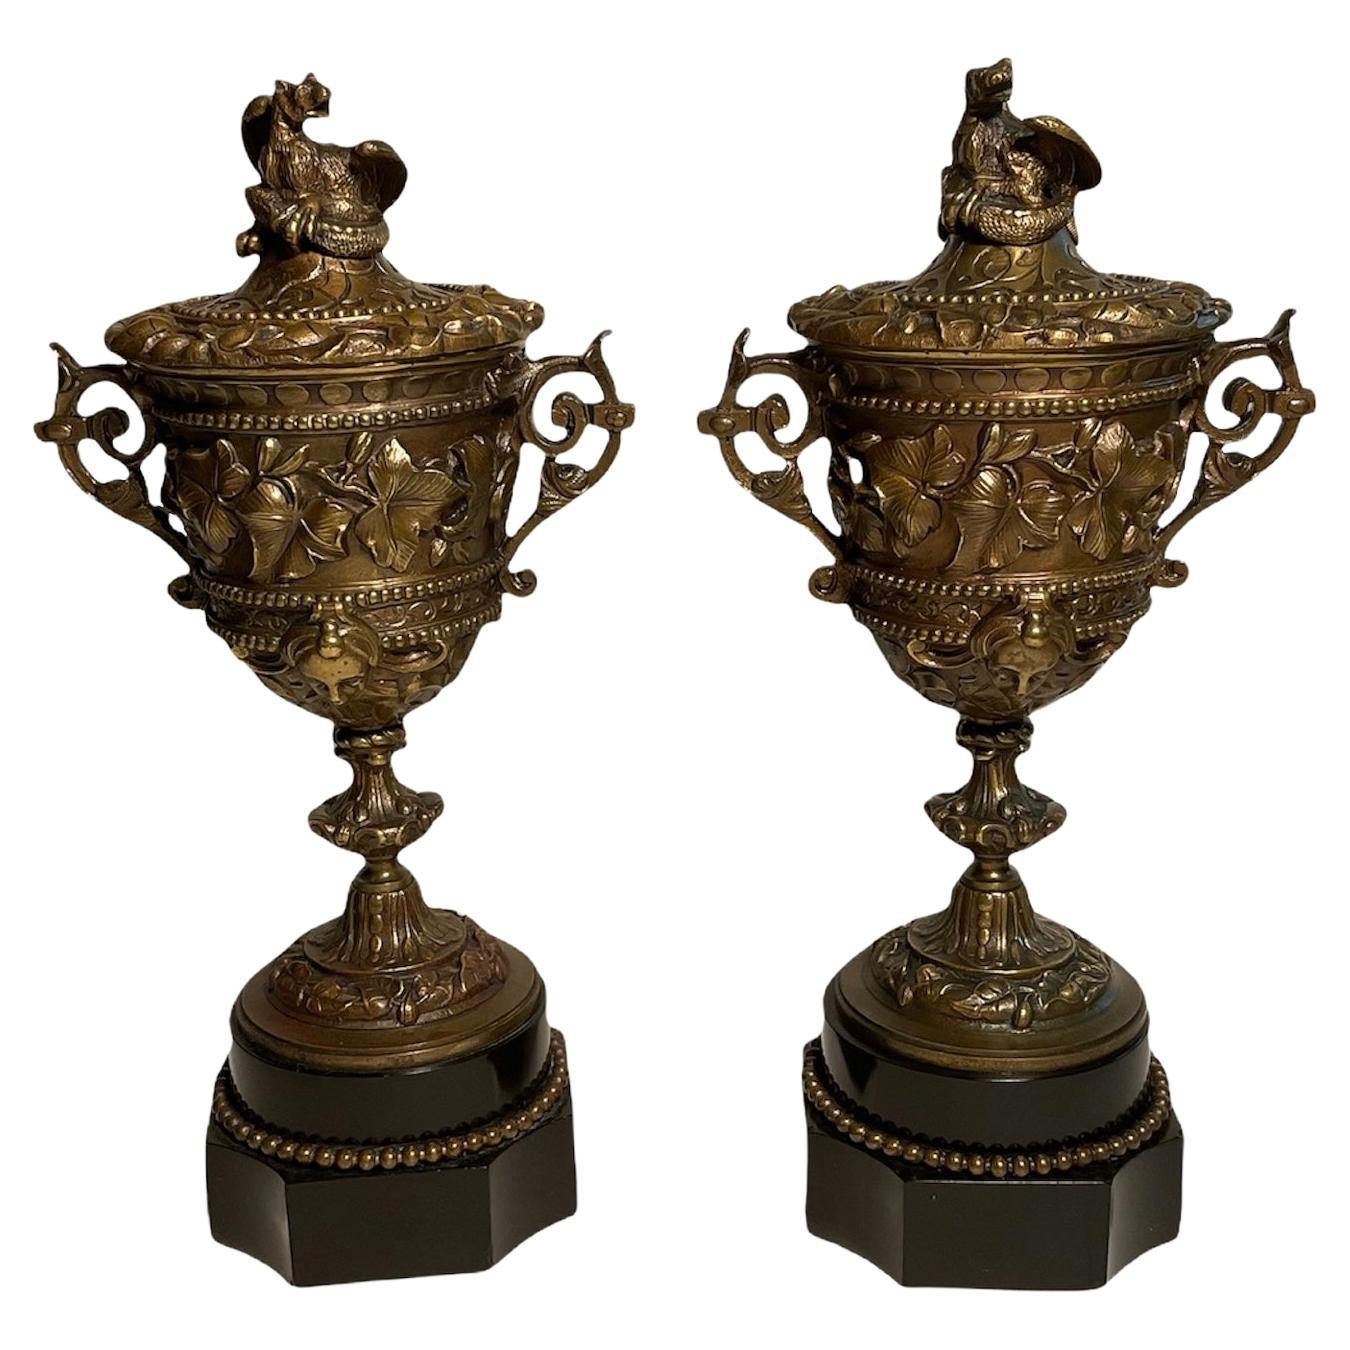 19th Century Pair of French Patinated Bronze Lidded Cups or Urns